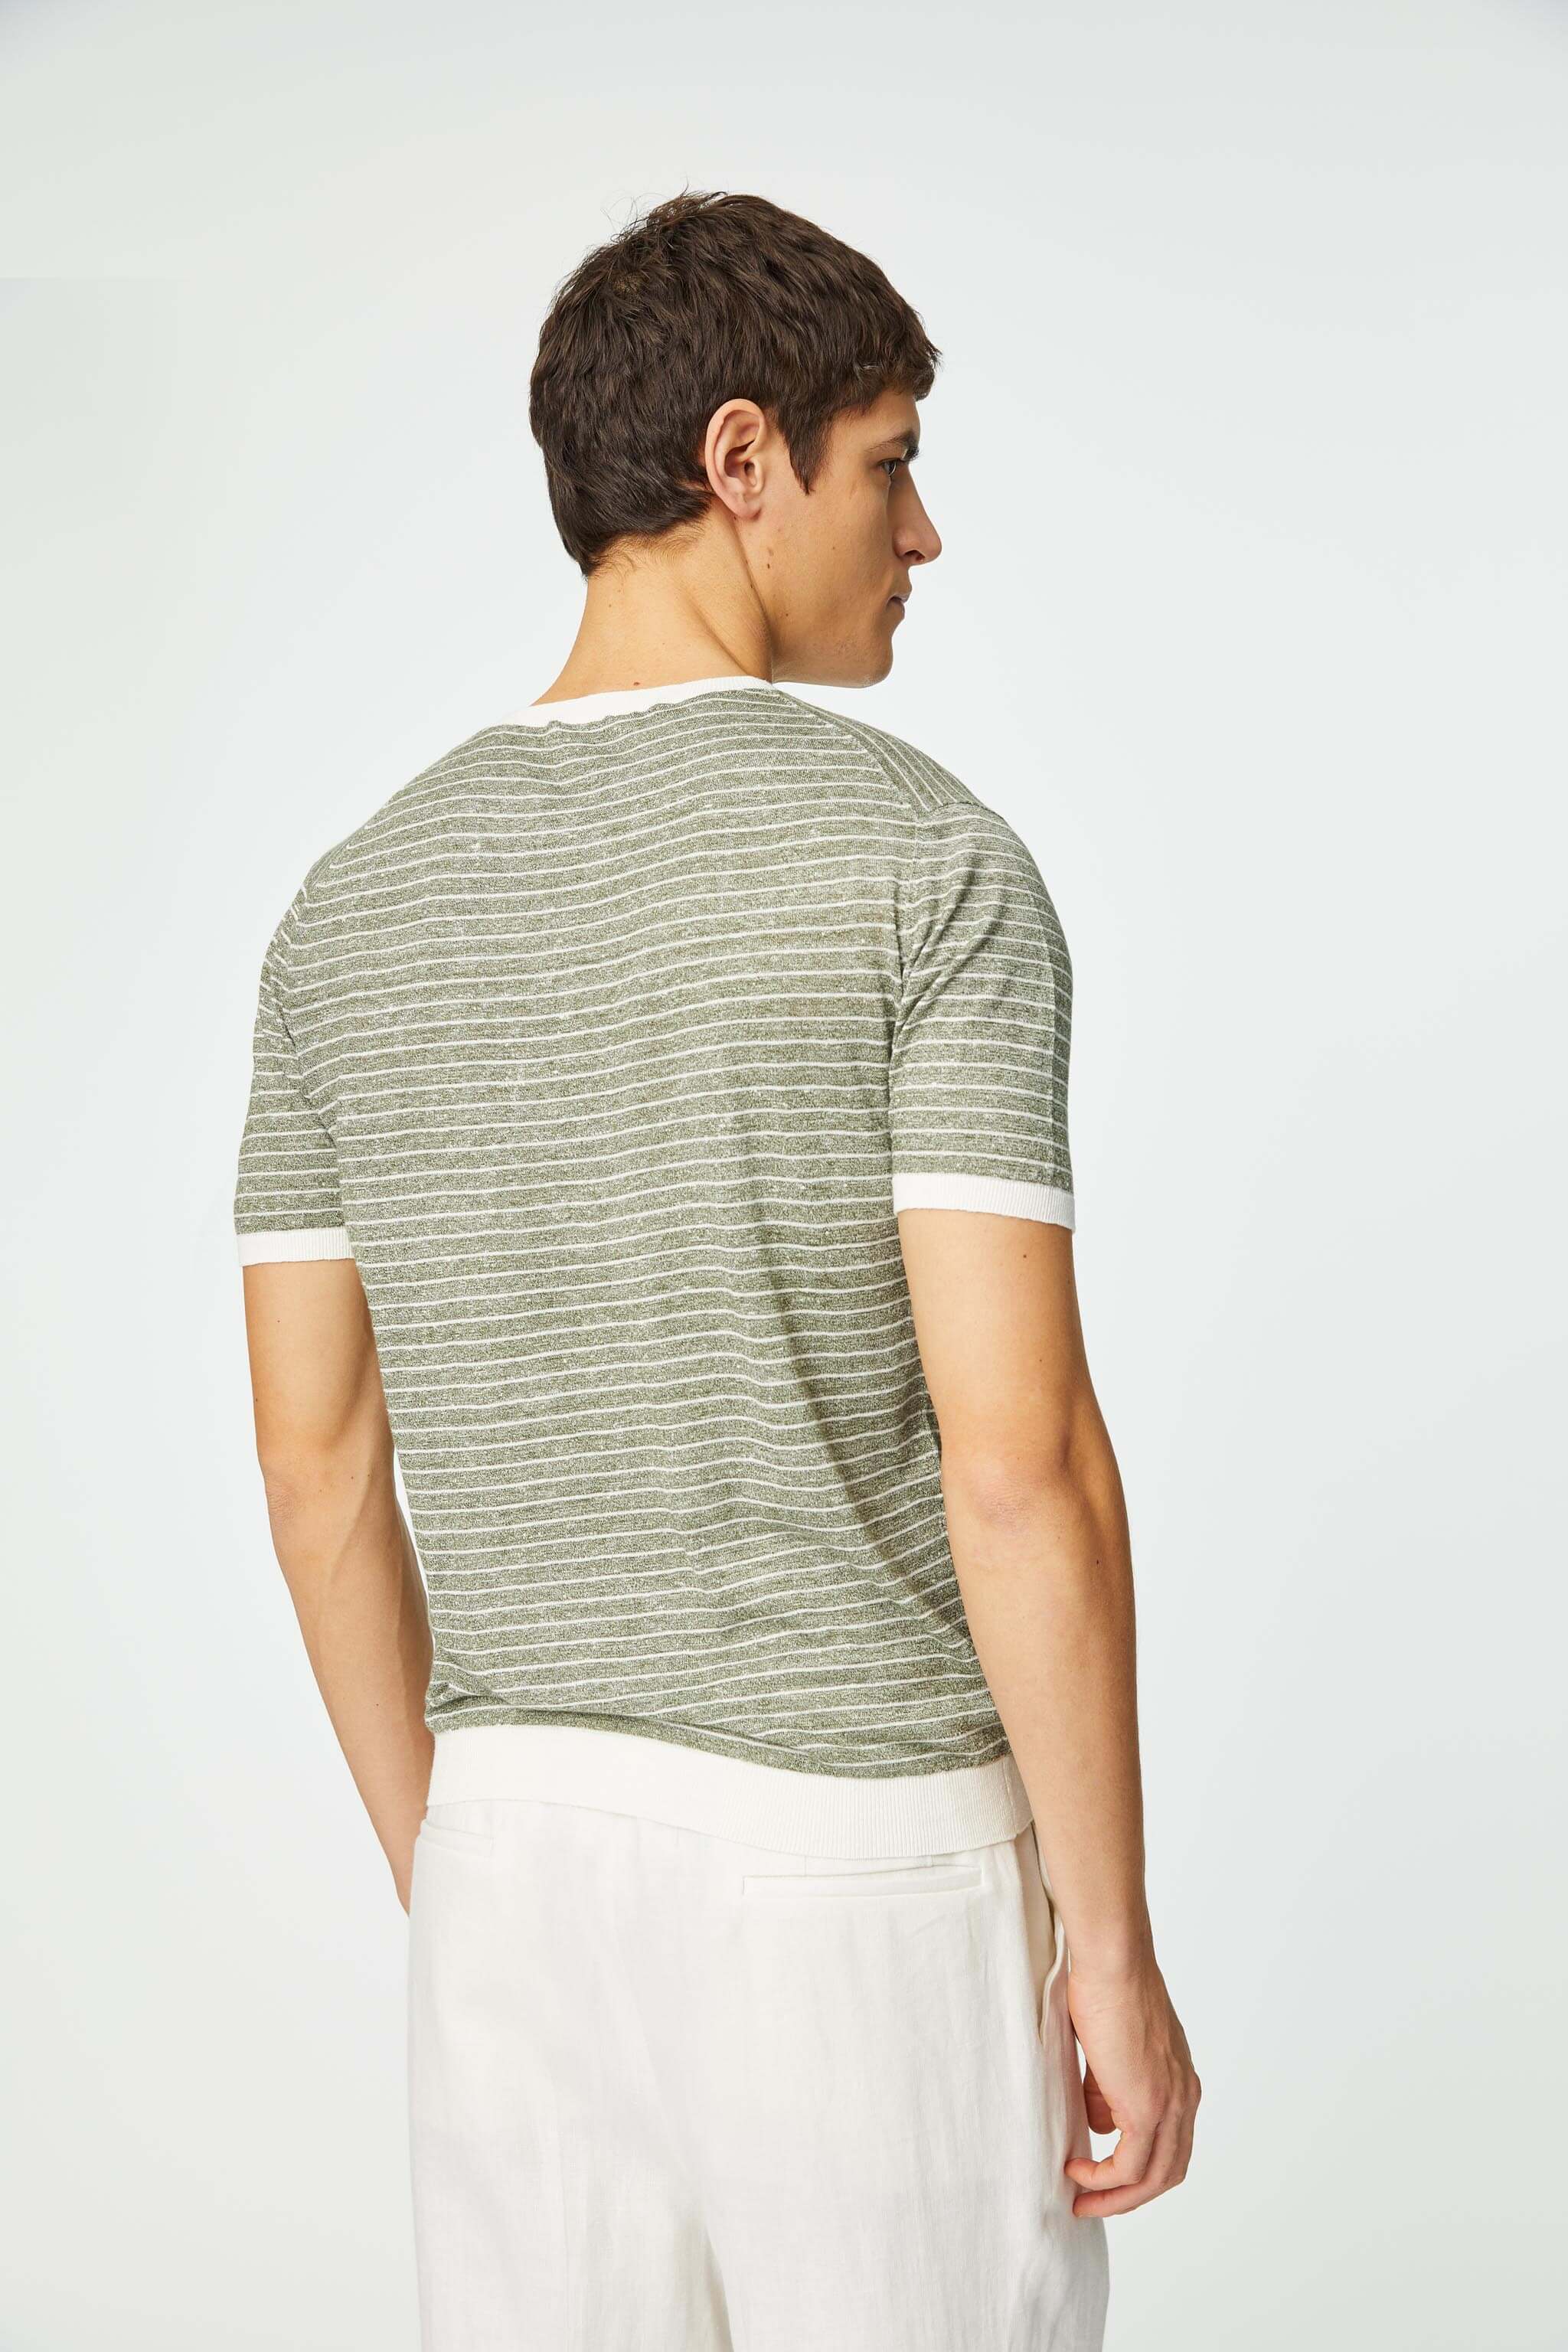 Stripe linen and cotton T-shirt in sage